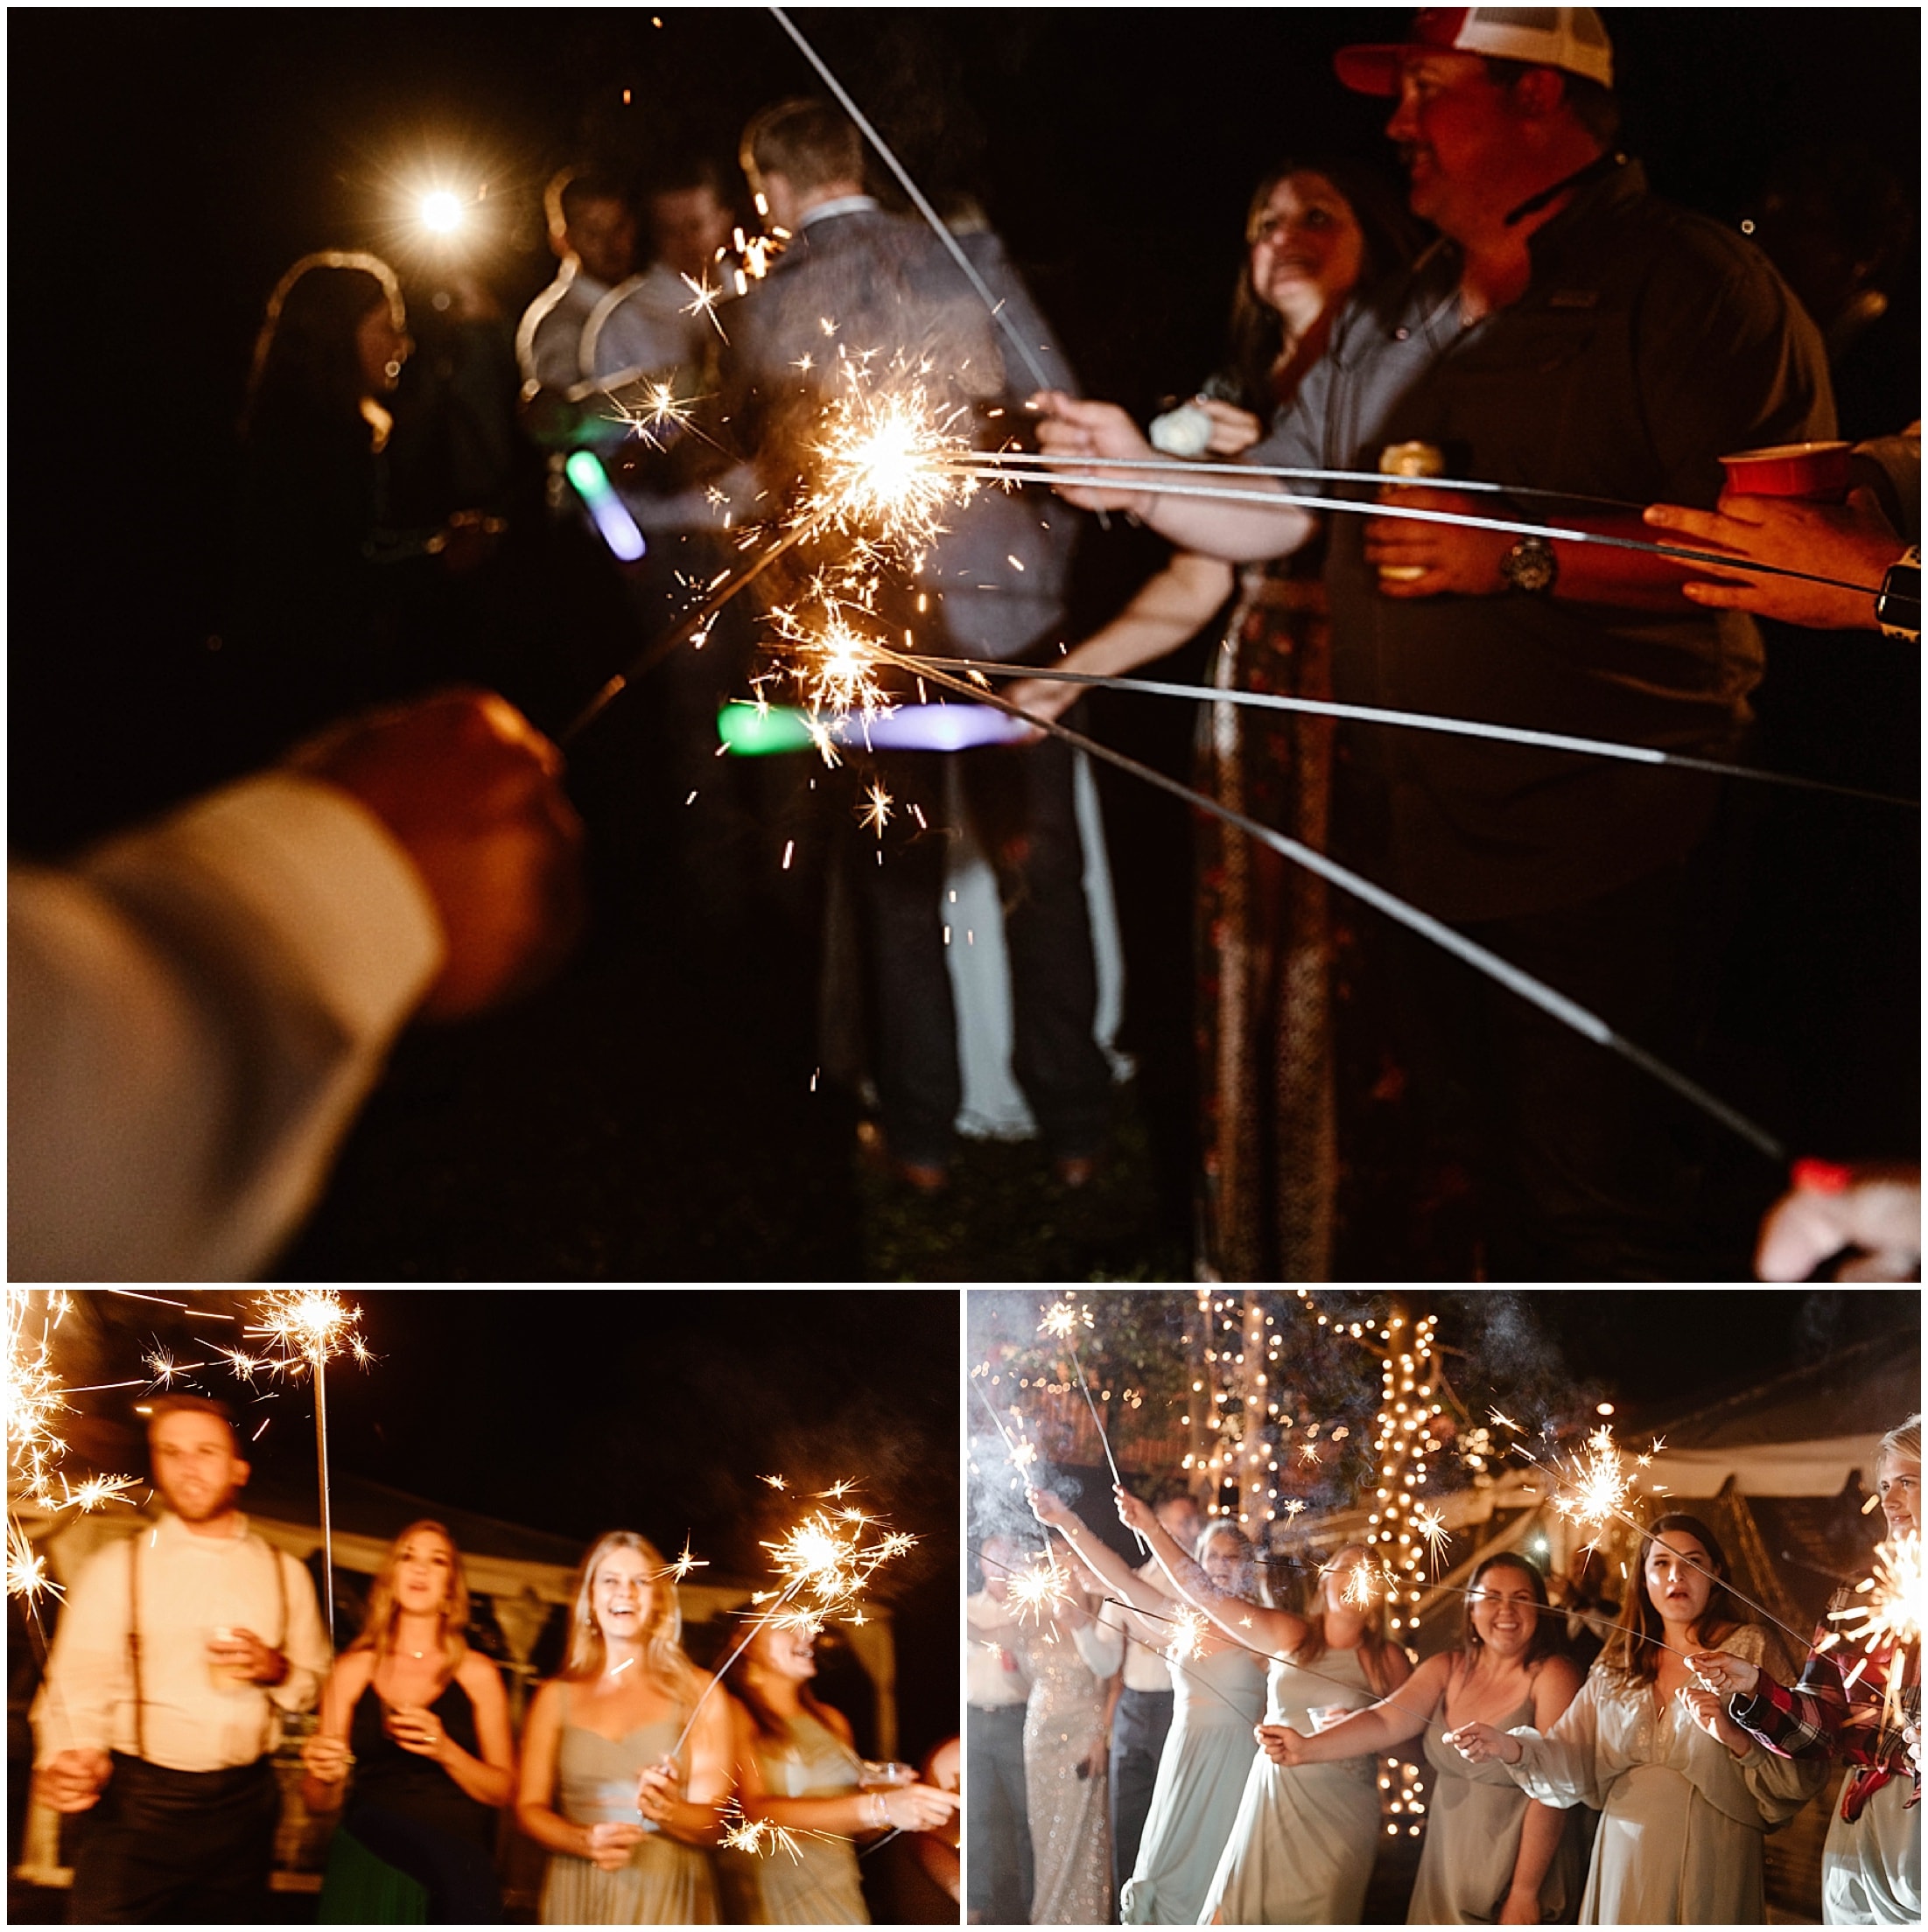 lighting sparklers for exit wedding party, Aspen Lodge, Red River New Mexico, Red River New Mexico Wedding, Weddings in New Mexico, Destination mountain wedding, destination mountain elopement, elopements in new mexico, places to get married in new mexico, destination elopement photographer, mountain wedding photographer, new mexico wedding photographer, new mexico elopement photographer, brit nicole photography, cabin wedding, new mexico cabin wedding, mountain landscape for wedding, small intimate mountain wedding, small intimate river wedding, wedding photographer in new mexico, junebug weddings, the knot, wedding wire, 41 productions with lindsay gomez, dallas texas bride, DJ Allen Gallegos, Tao Cakes, New Mexico Wedding planner karen kelly, barnes jewelry, Lillian West bridal dress, Lang’s Bridal, enchanted florist wedding flowers, places to get married in texas, texas wedding photographer, texas elopement photographer, forest wedding, forest elopement, wooded area for wedding, wooded elopement, elopement in the woods, amarillo wedding photographer, amarillo elopement photographer